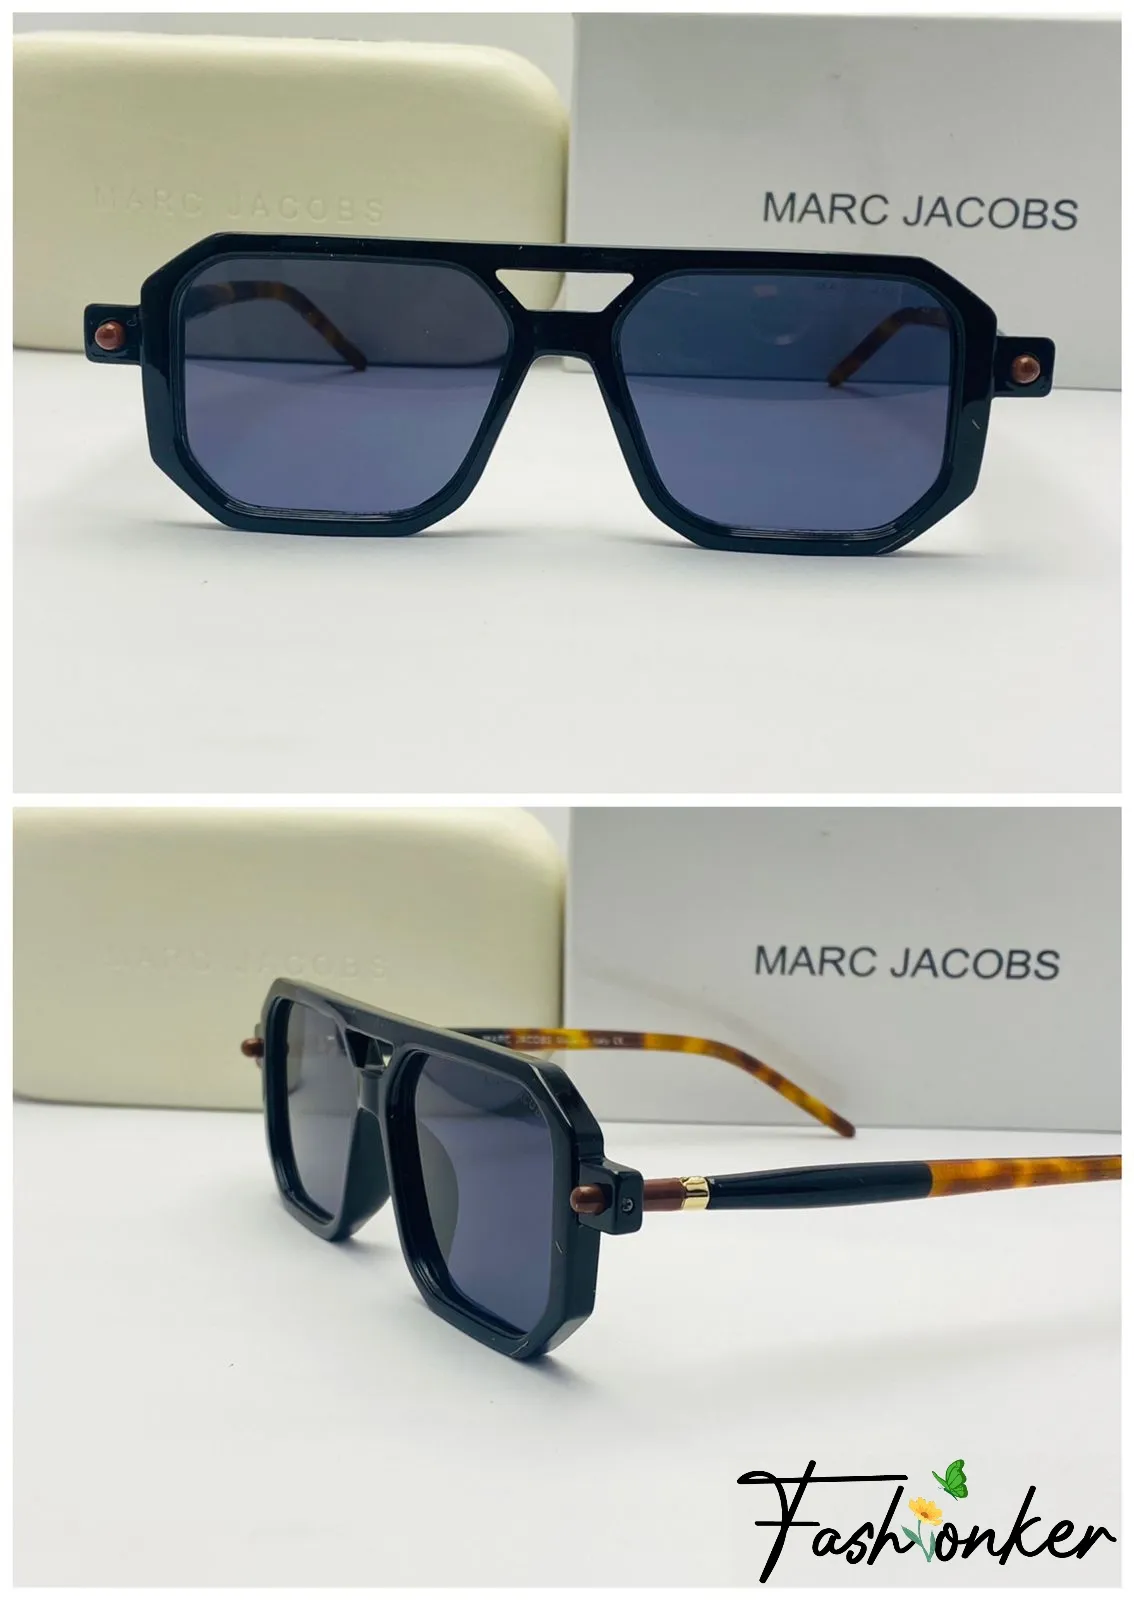 Marc Jacobs Shades